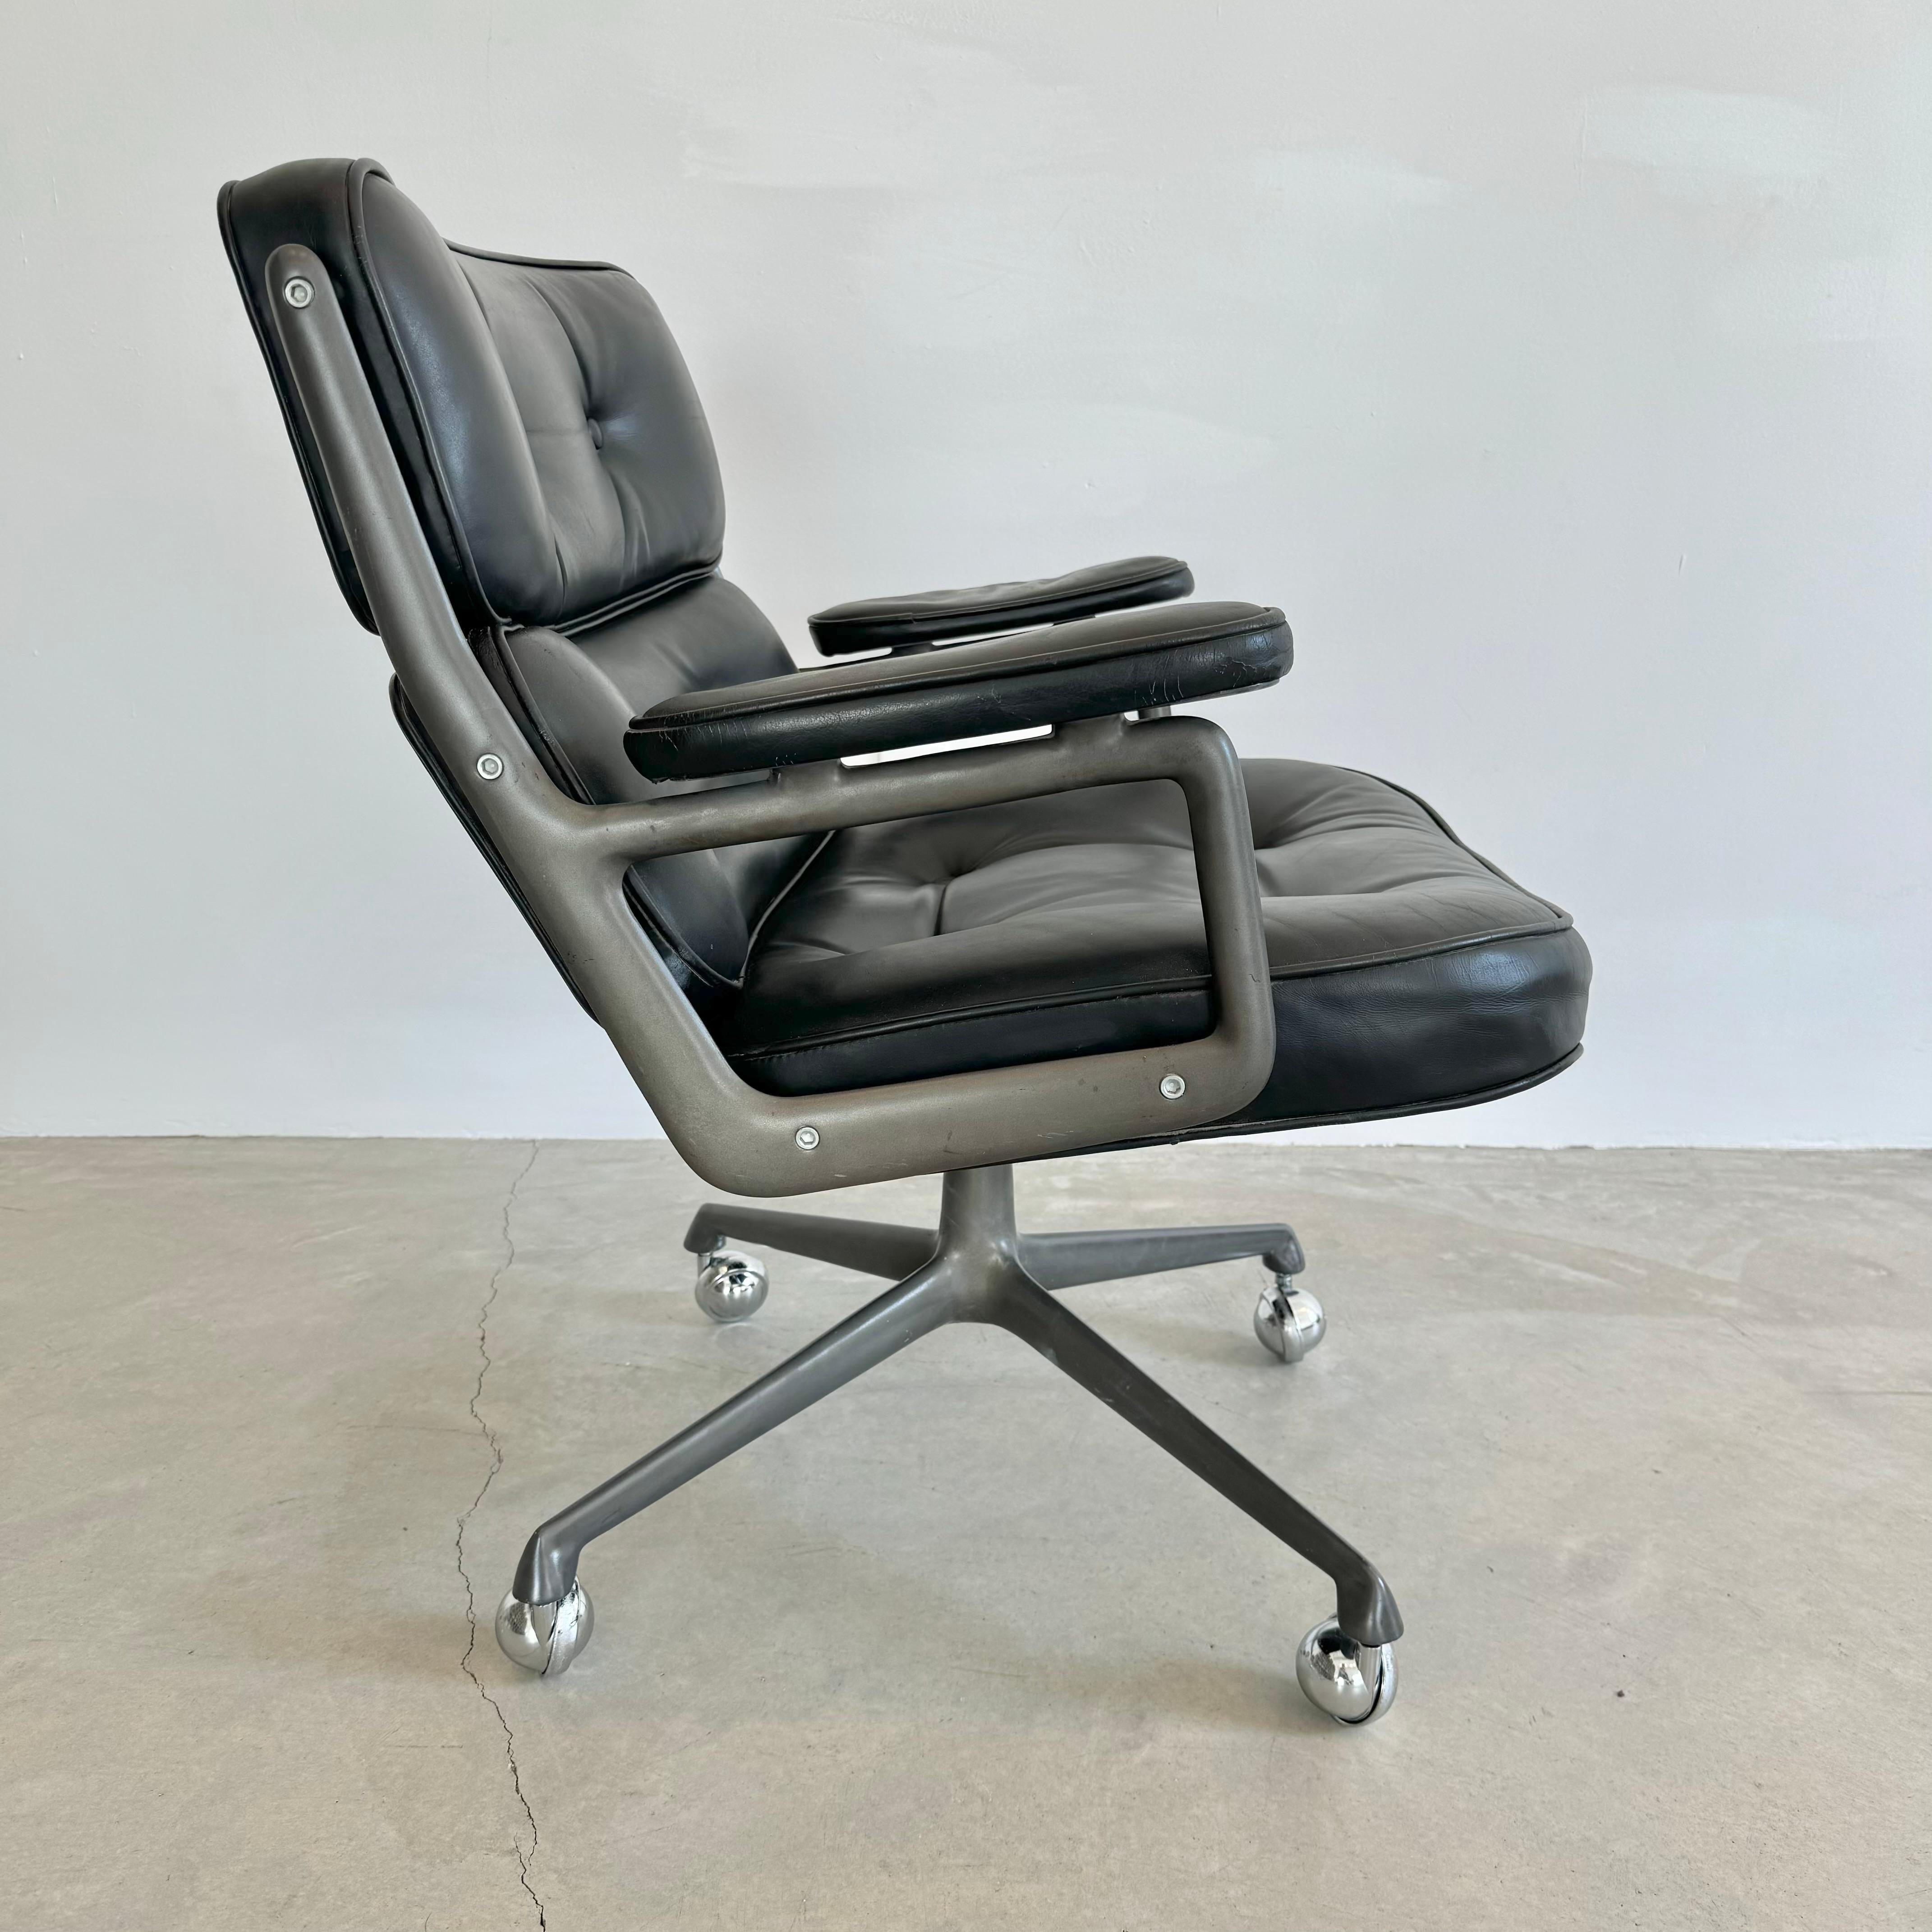 Eames Time Life Lobby Lounge Chair in Black Leather for Herman Miller, 1980s USA For Sale 4